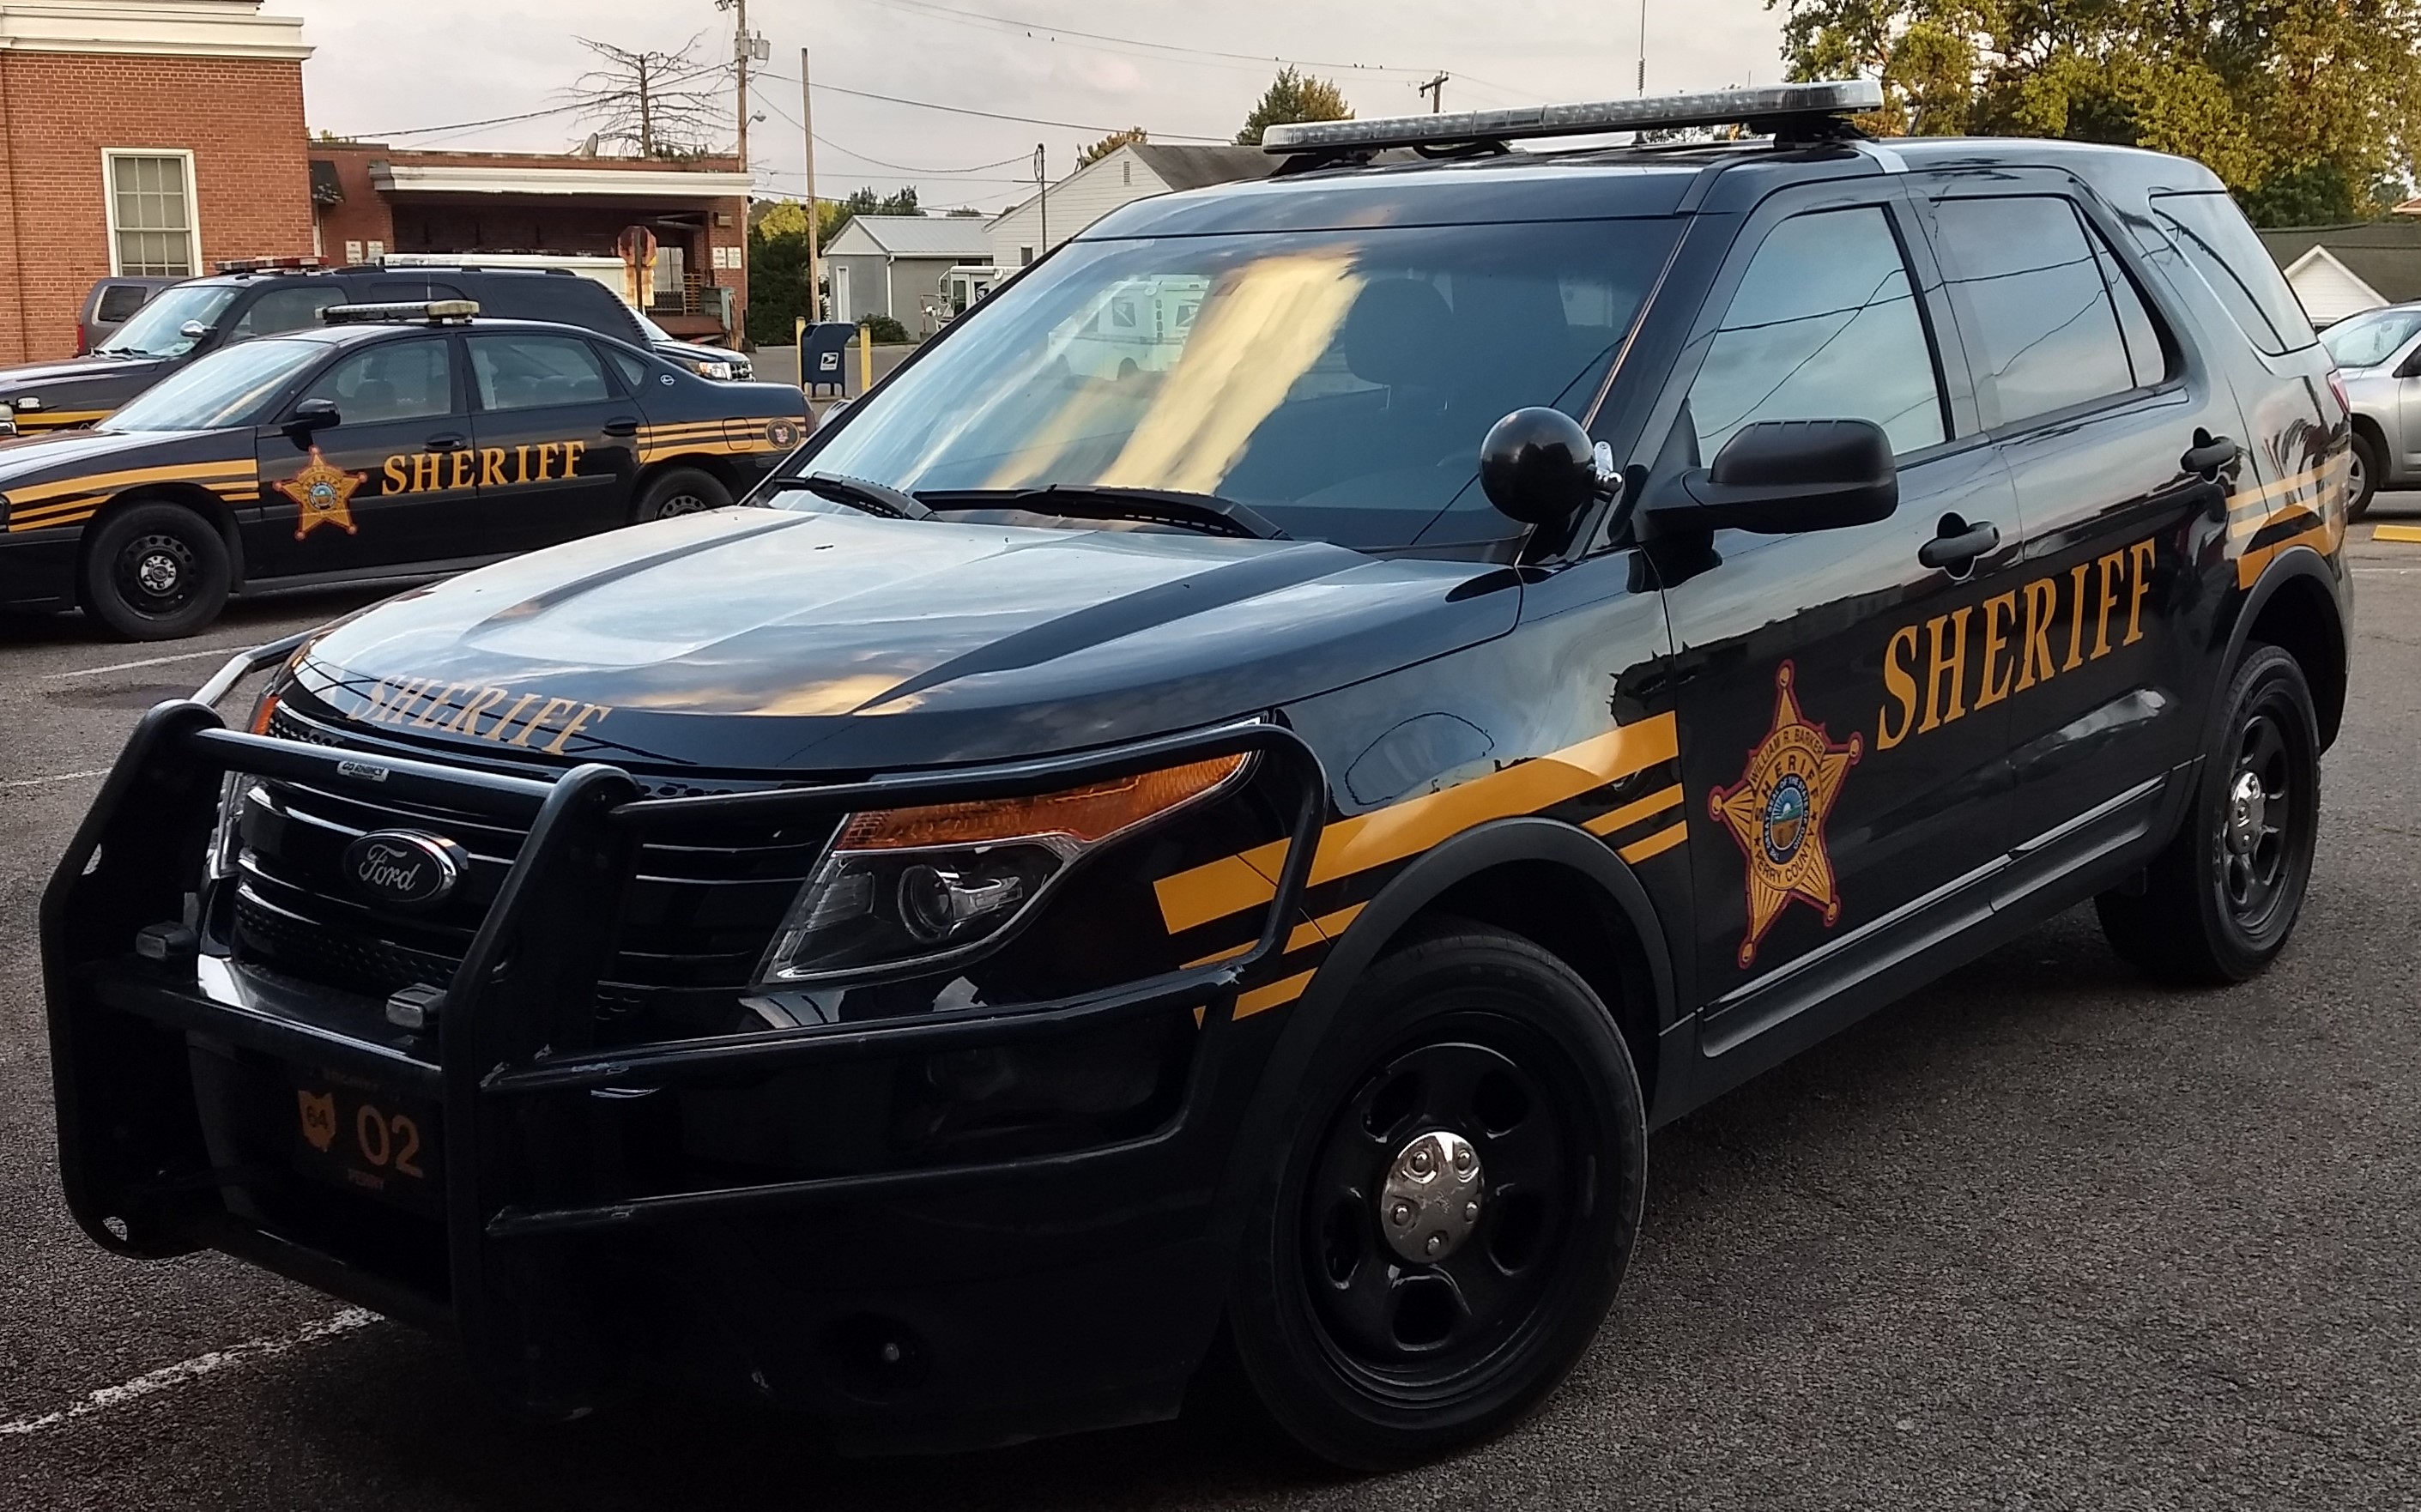 Sheriff’s Sale – Perry County Sheriff's Office